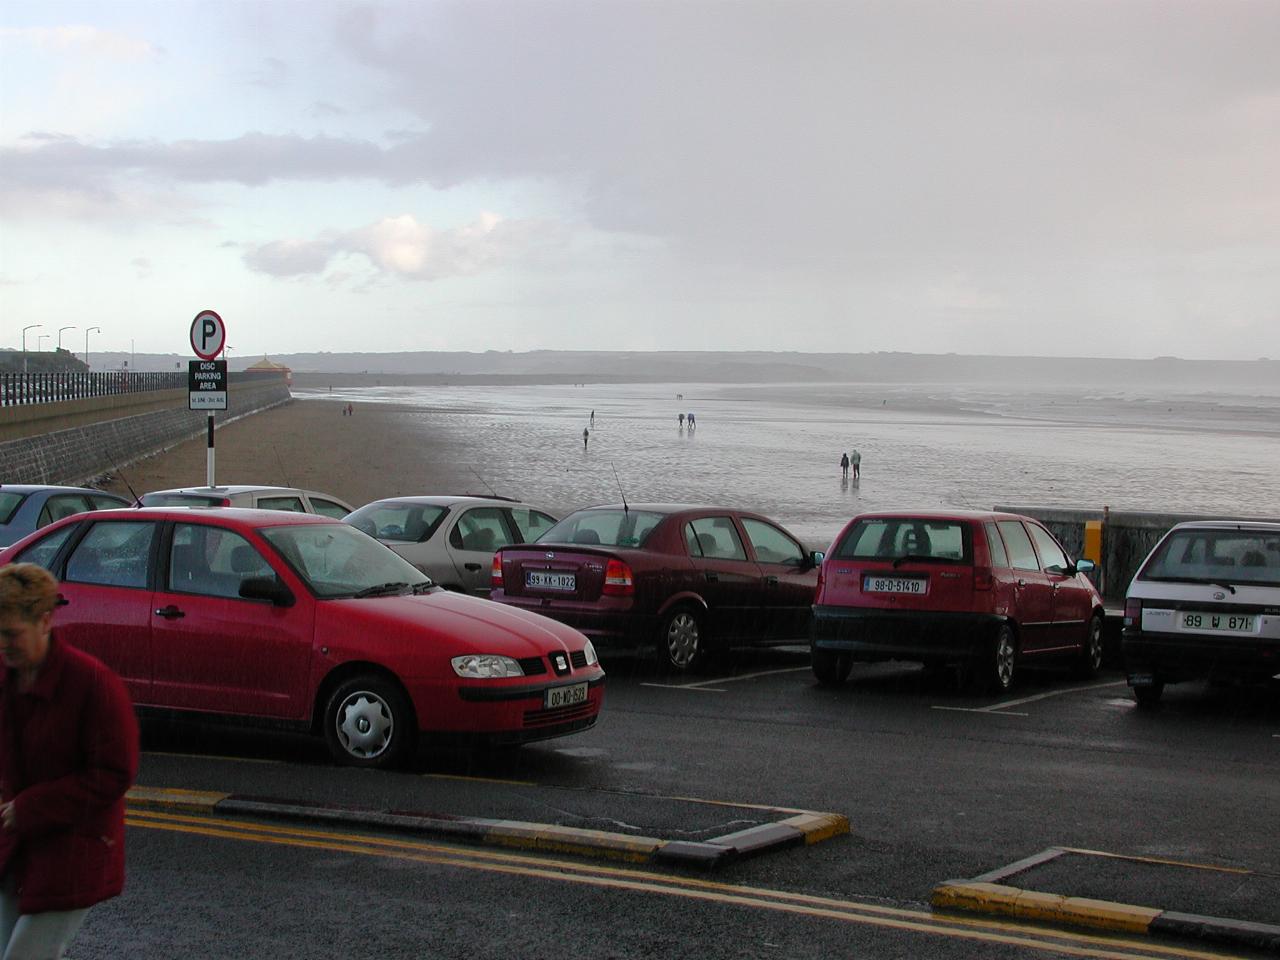 Beach area at Tramore (south of Waterford)